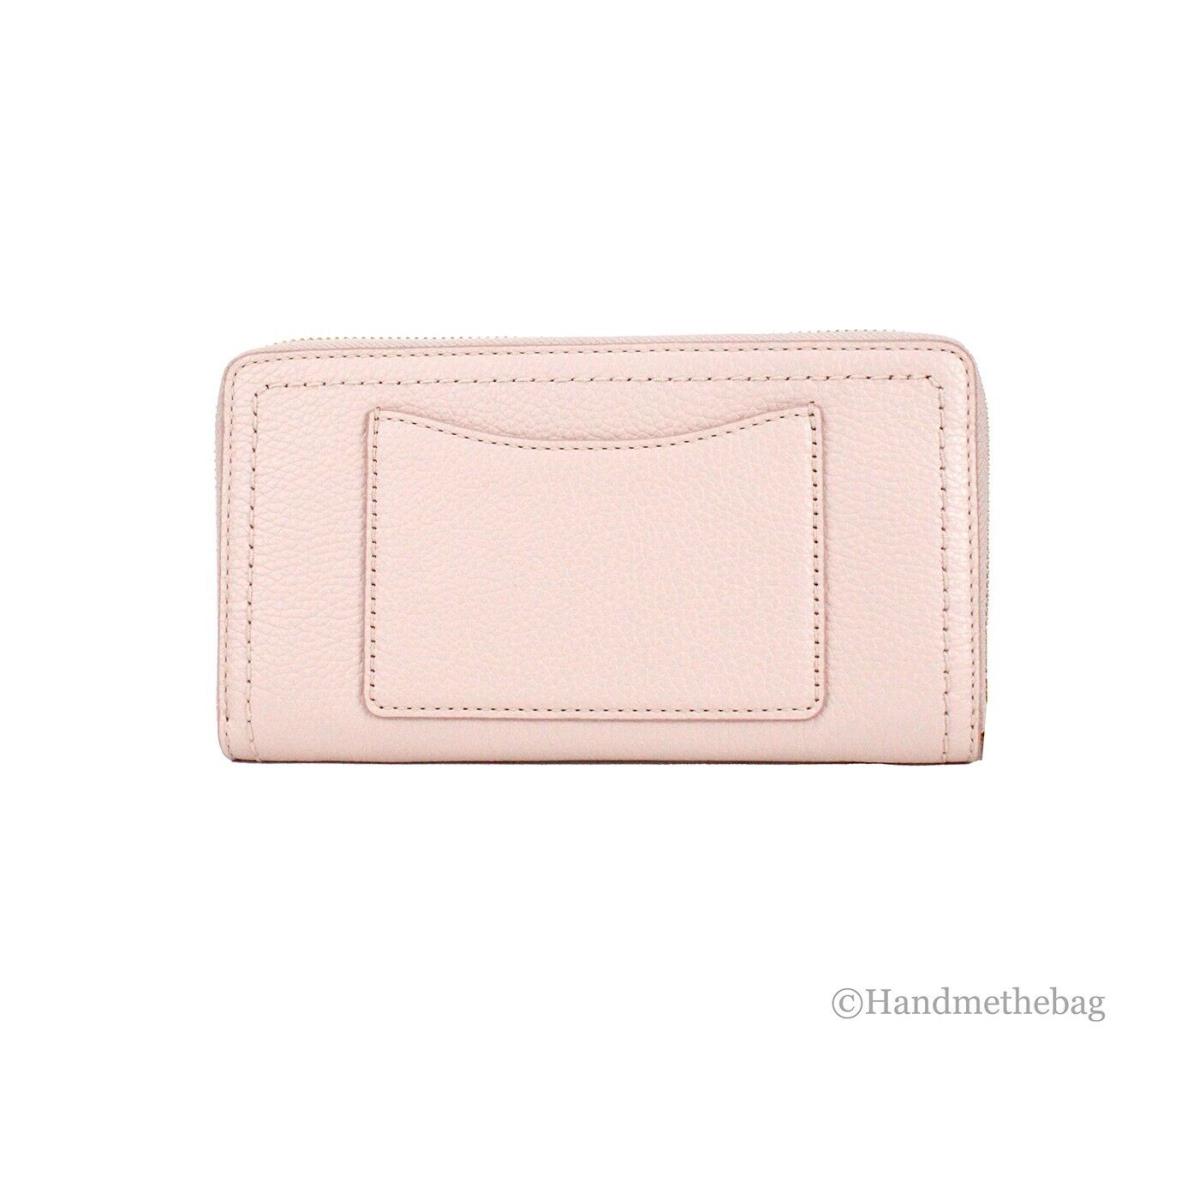 Marc Jacobs Large Peach Whip Pebble Leather Continental Zip Around Phone Wallet